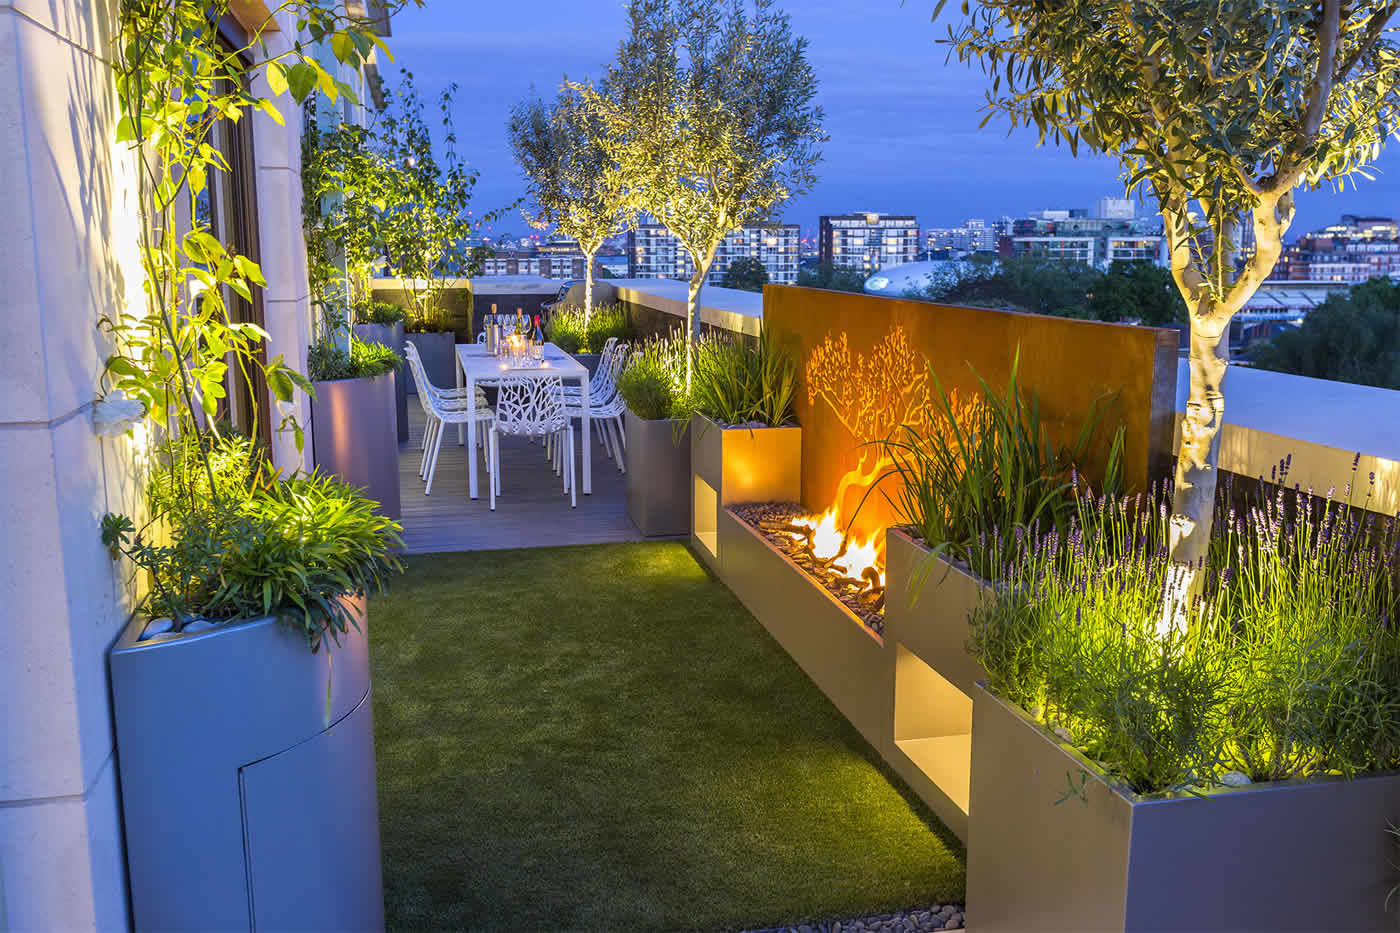 Roof Terrace Design St John's Wood London, by The Garden Buidlers